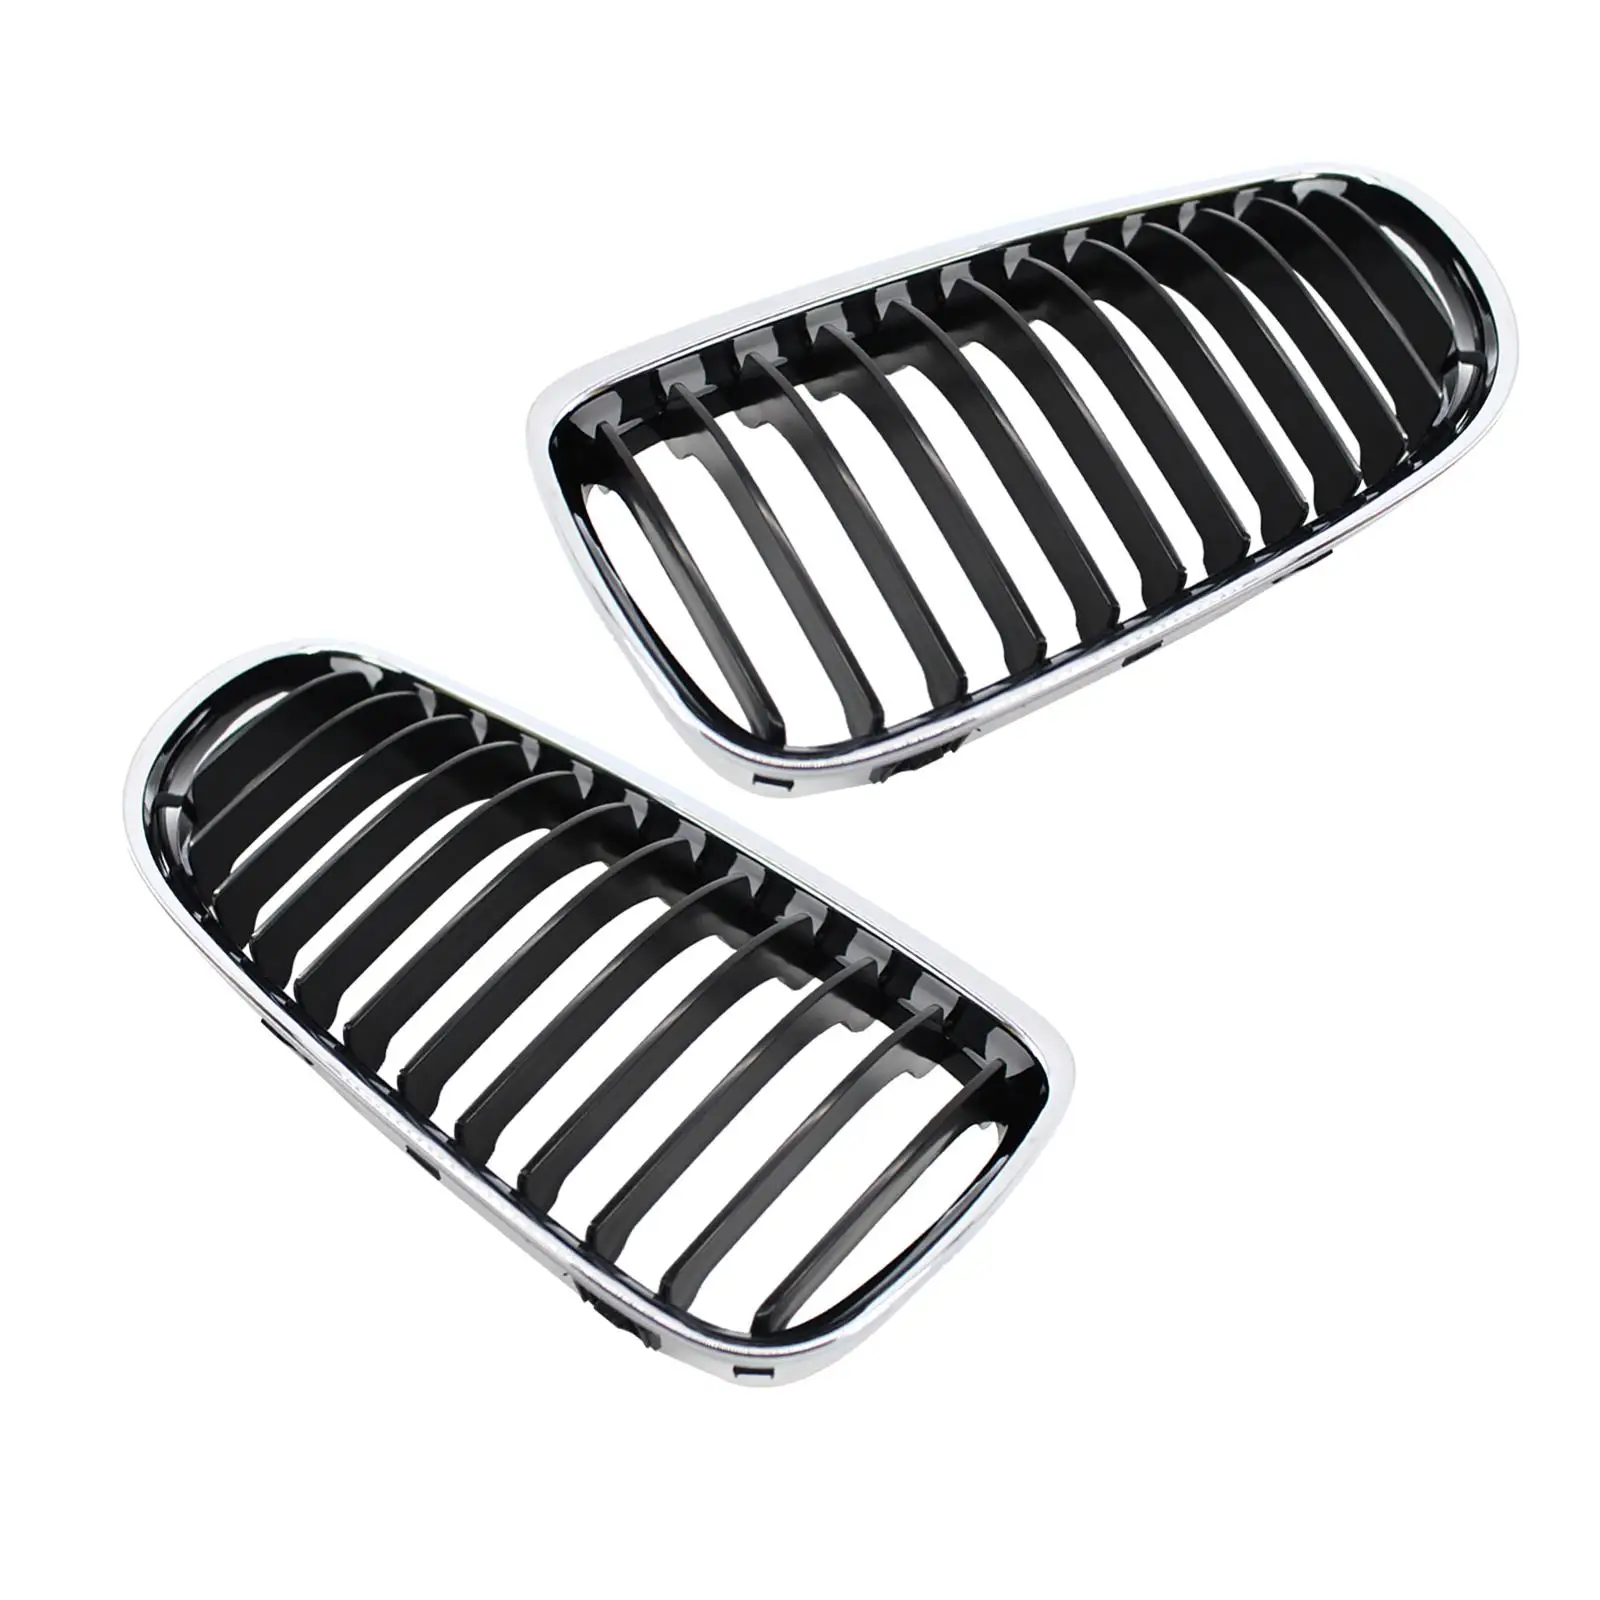 51137201969 Front Grilles Car Front Grille for BMW E90 Lci 09-11 Black Replaces